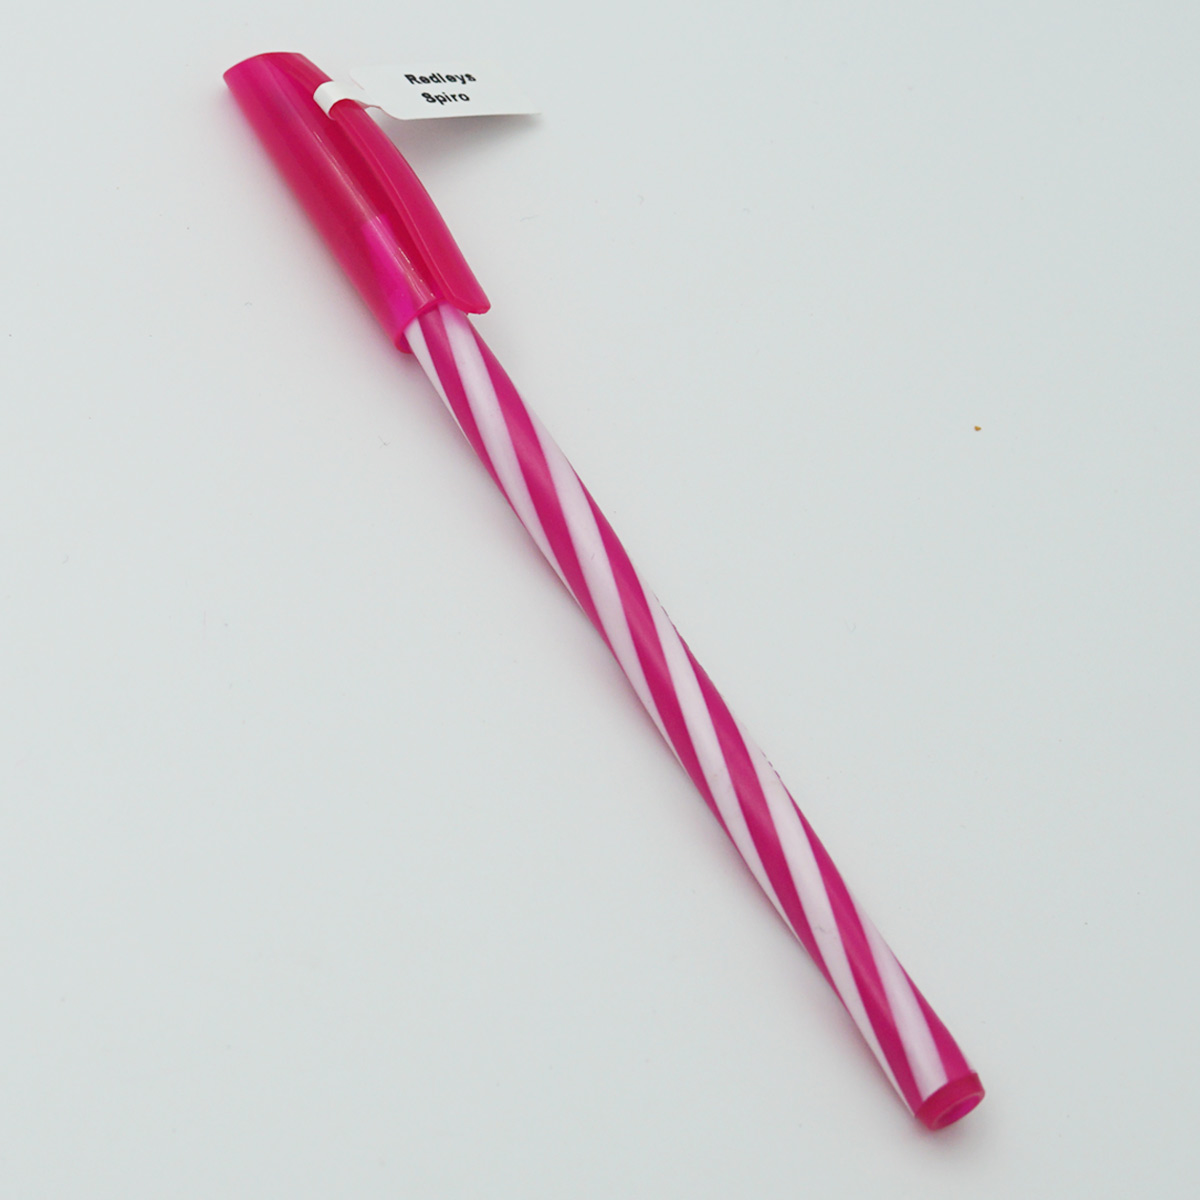 Ridleys Spiro 0.7 Pink With White Color Body And Pink Color Cap Blue Writing Cap Type Ball Pen SKU 23867